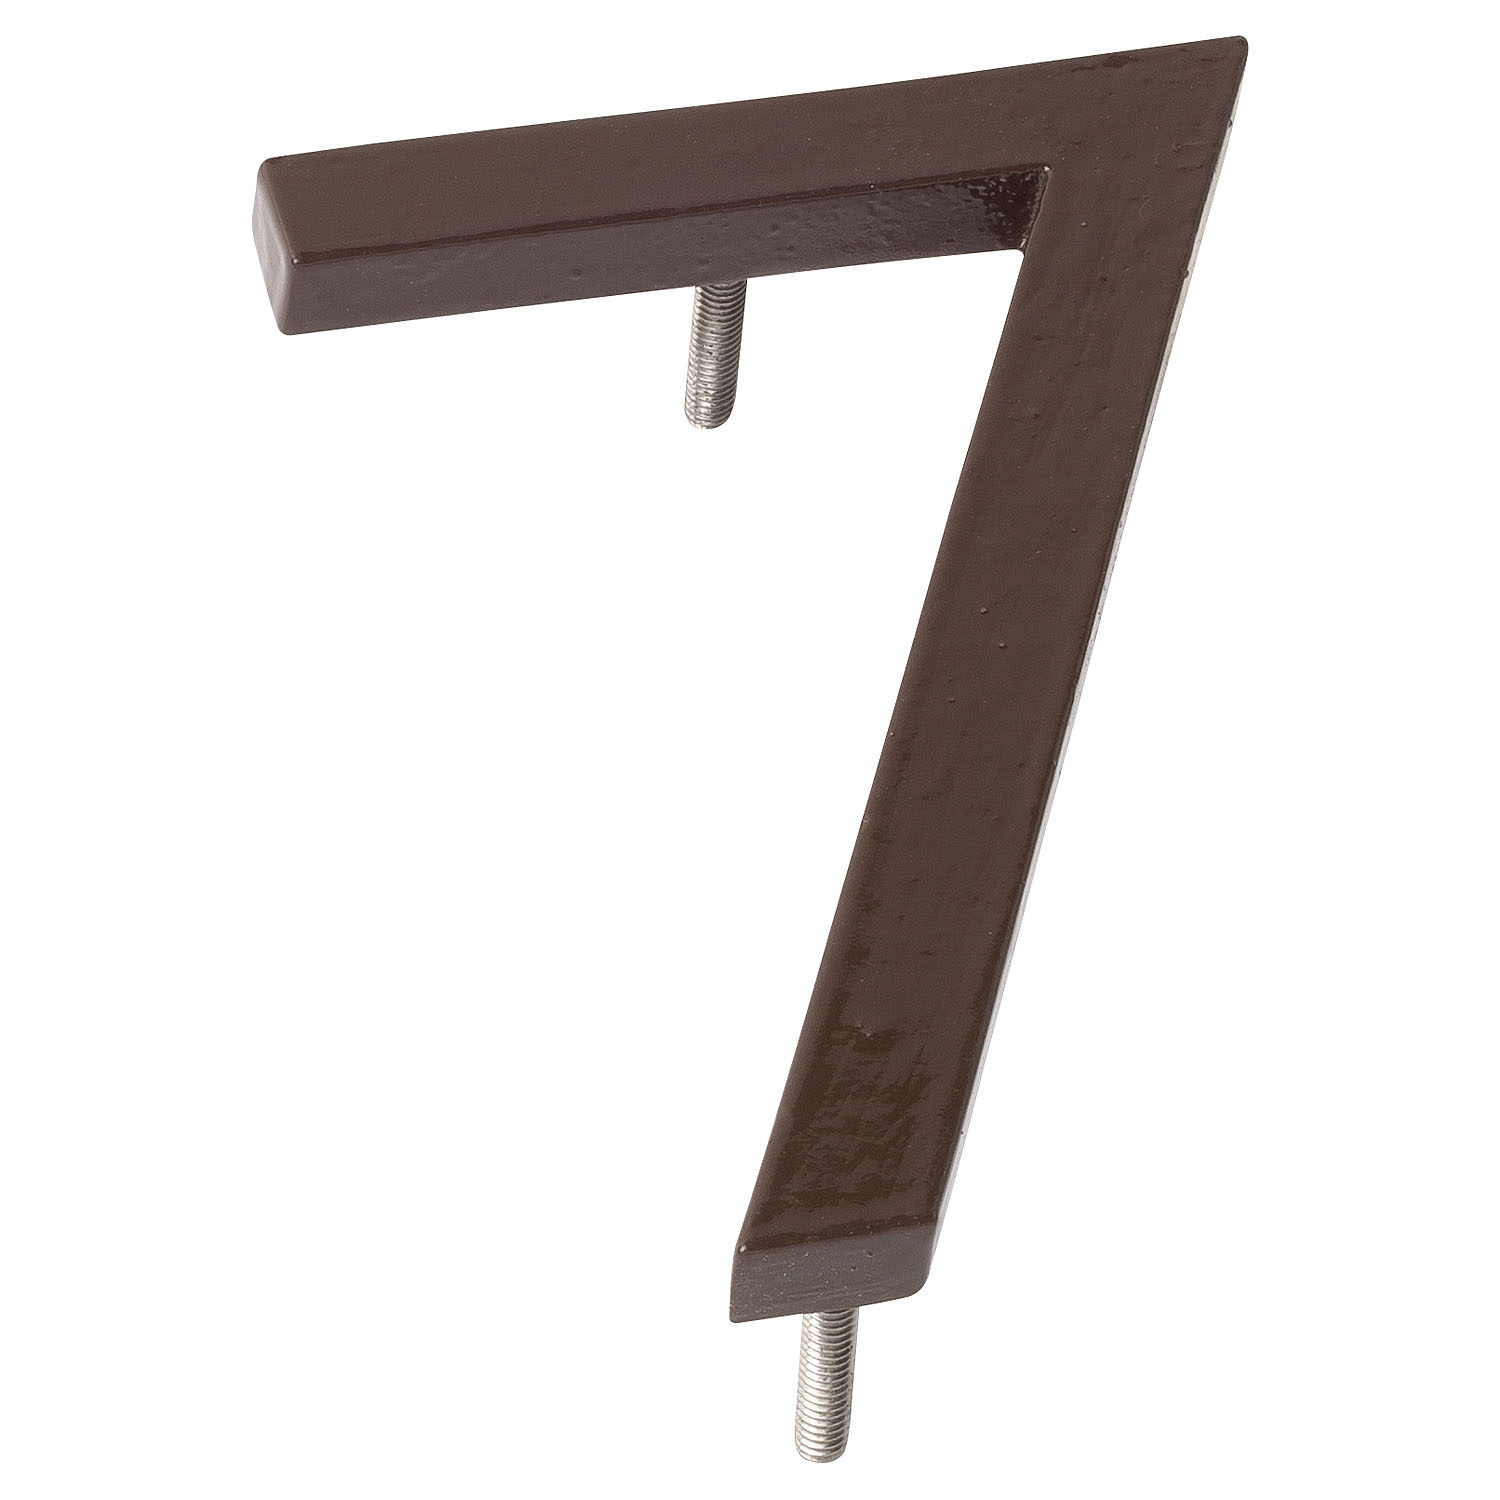 4 Roman Bronze Aluminum Floating Or Flat Modern House Numbers 0 9 The Address Number Store